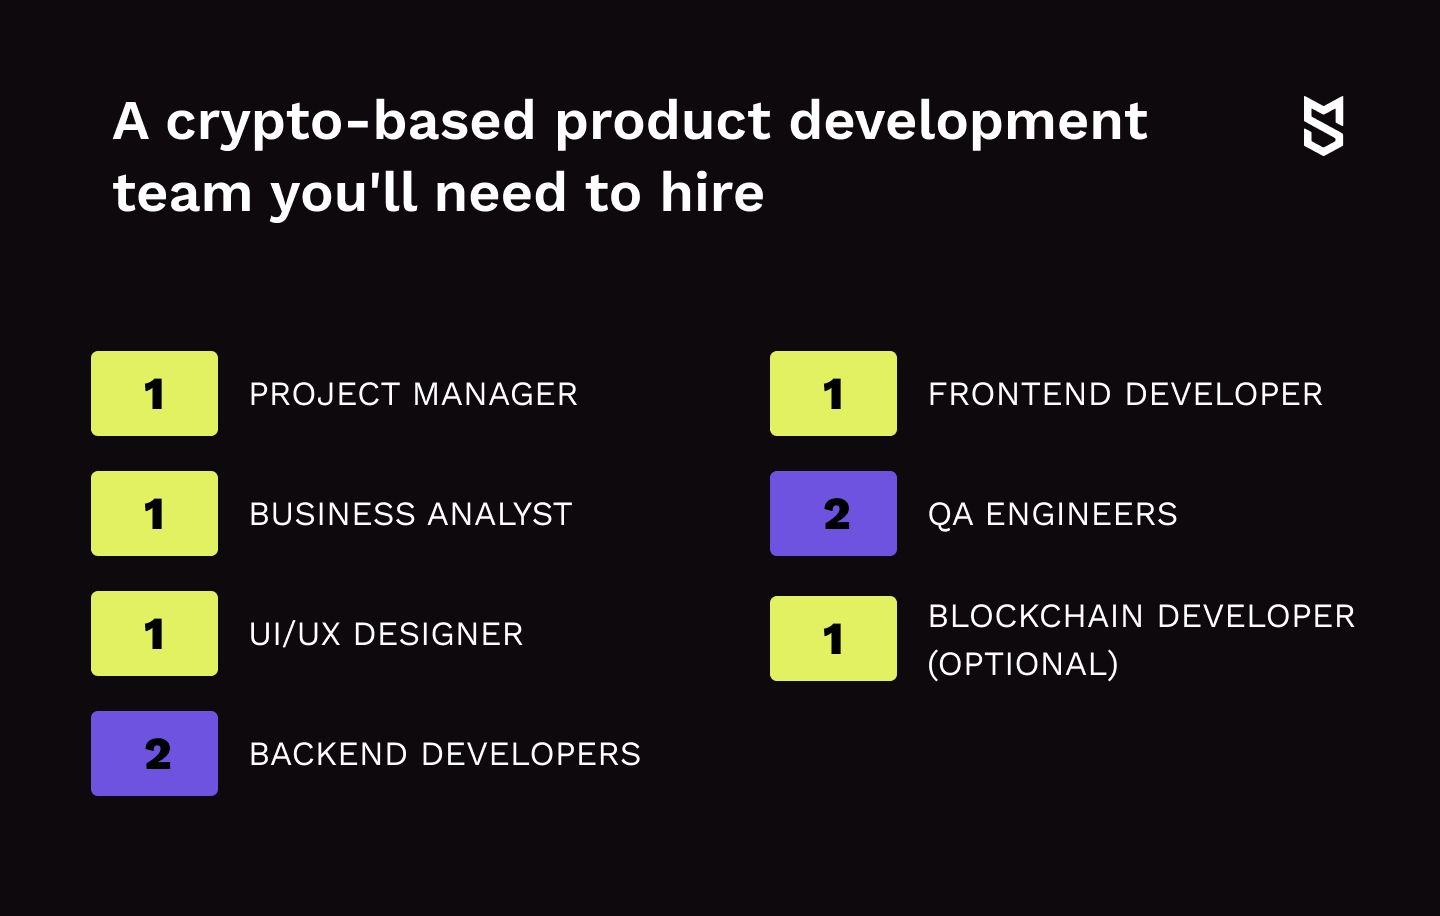 A crypto-based product development team you'll need to hire